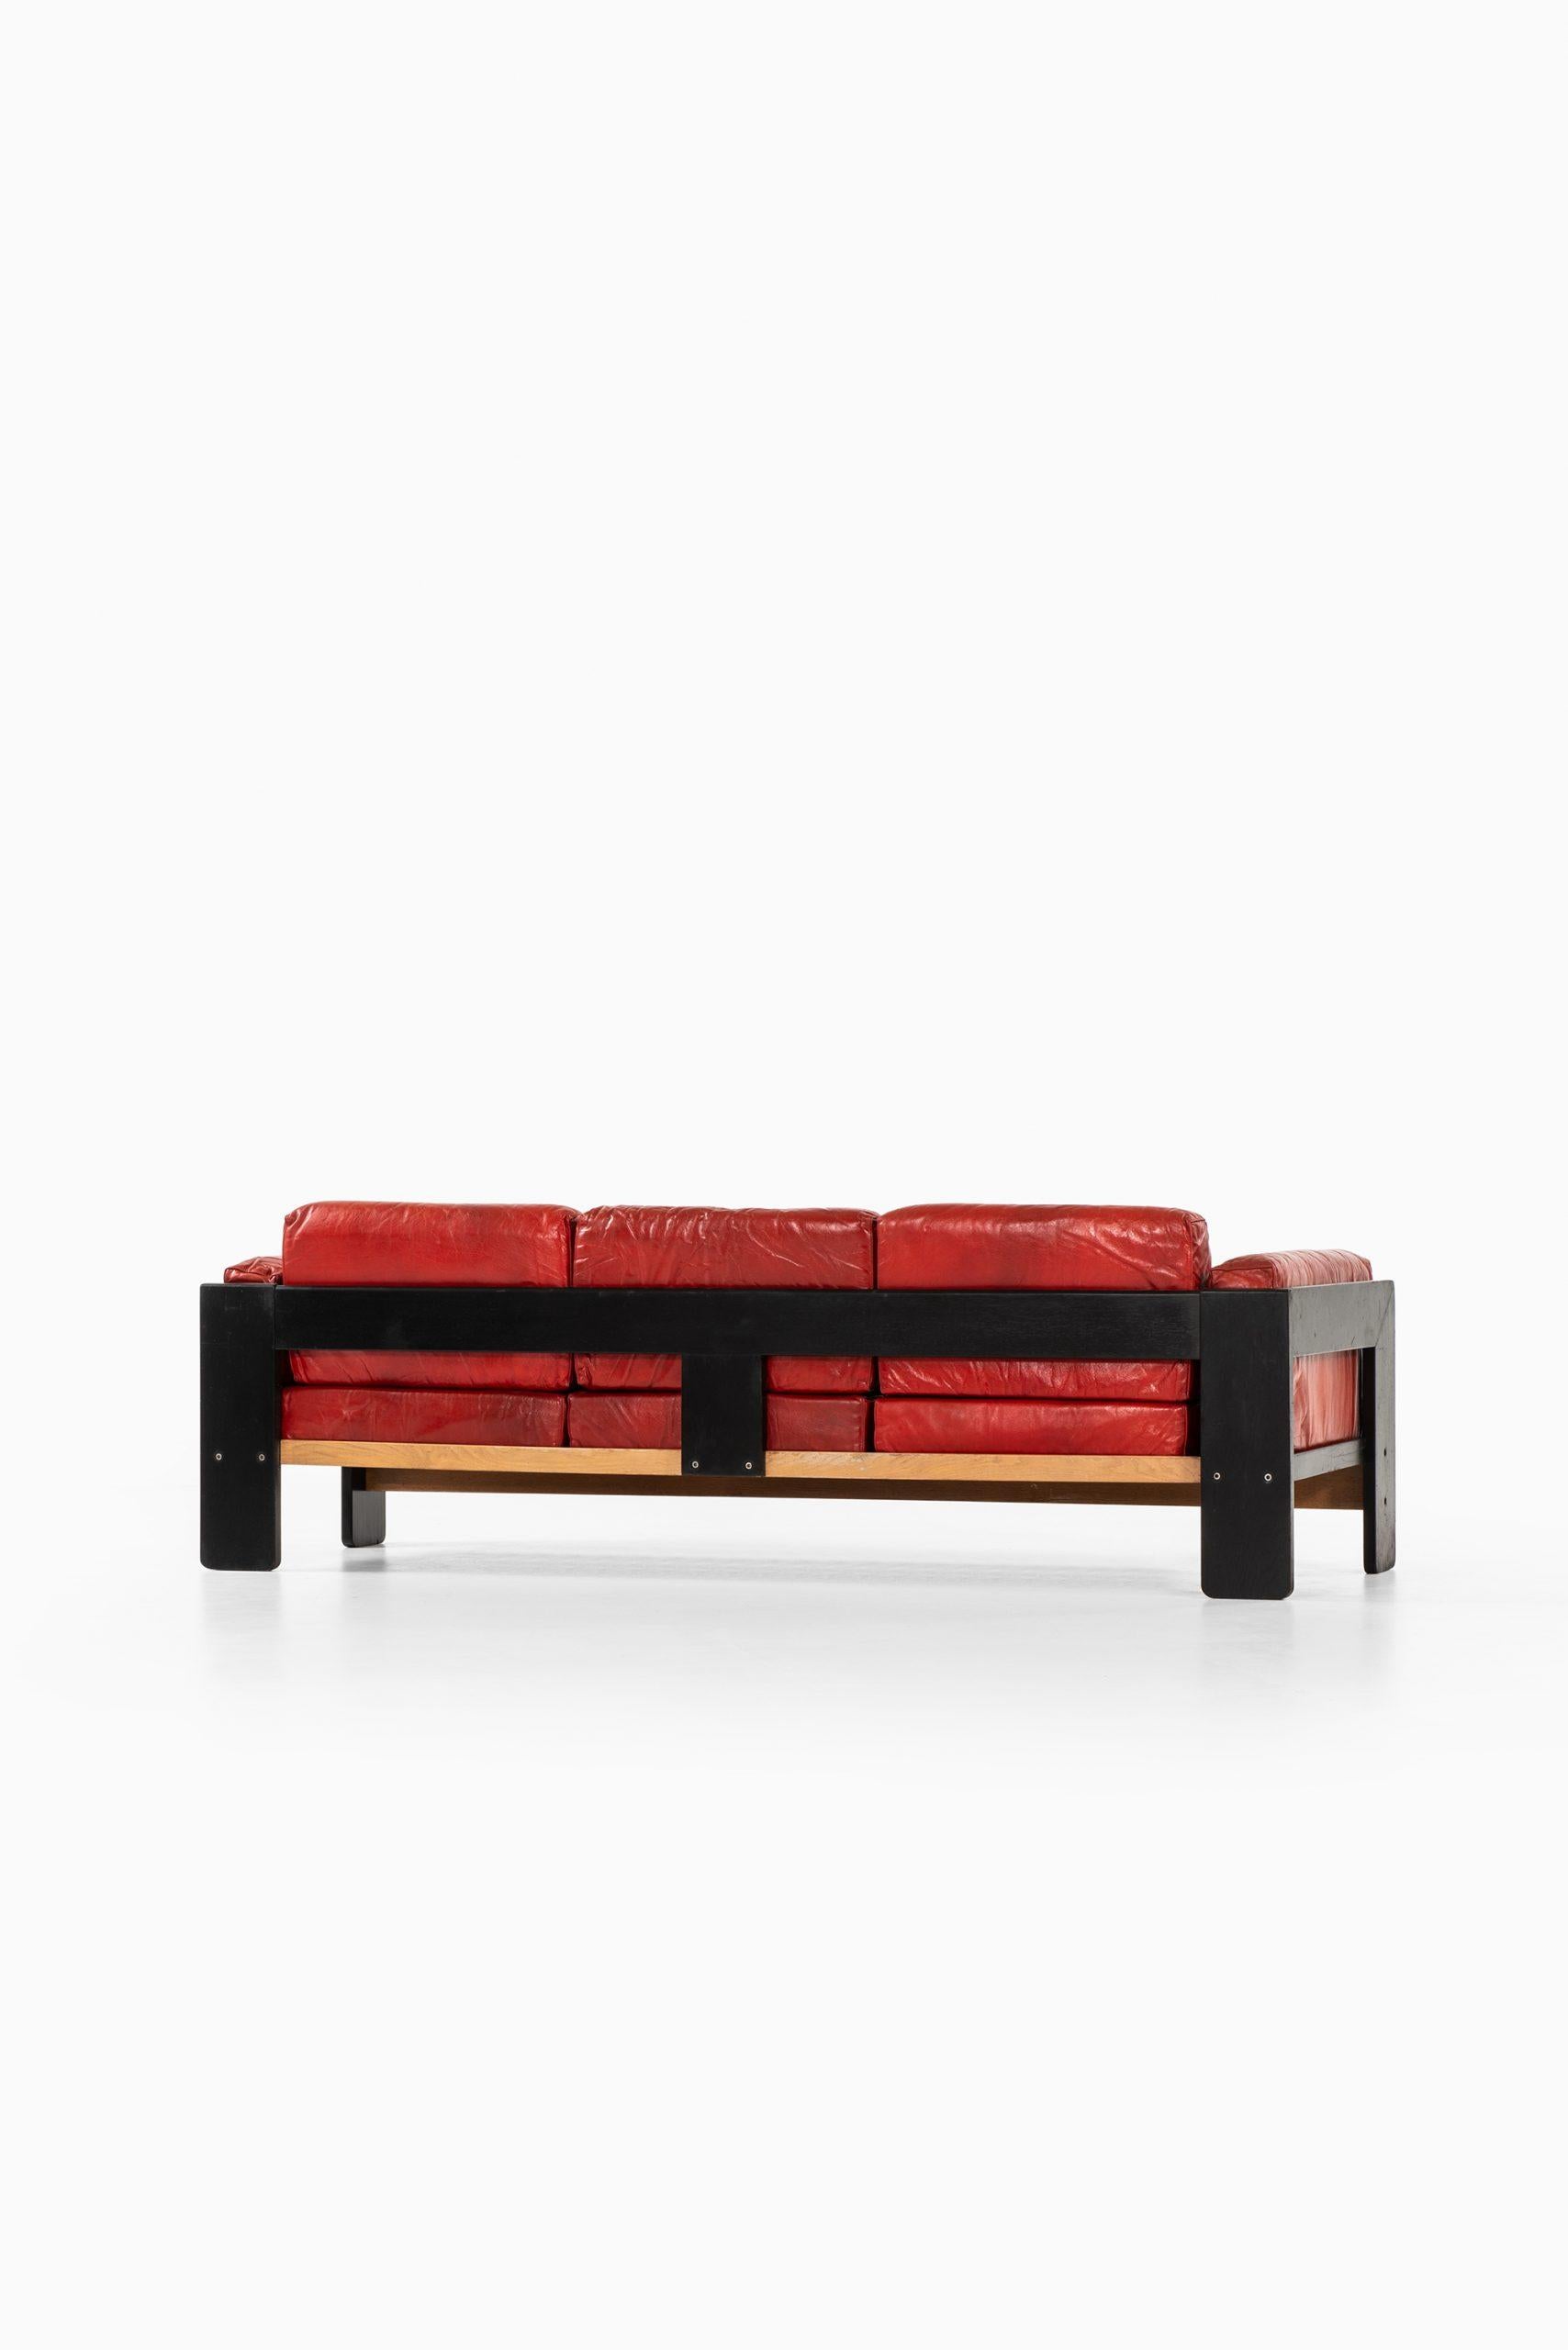 Wood Tobia Scarpa Sofa Model Bastiano Produced by Haimi in Finland For Sale